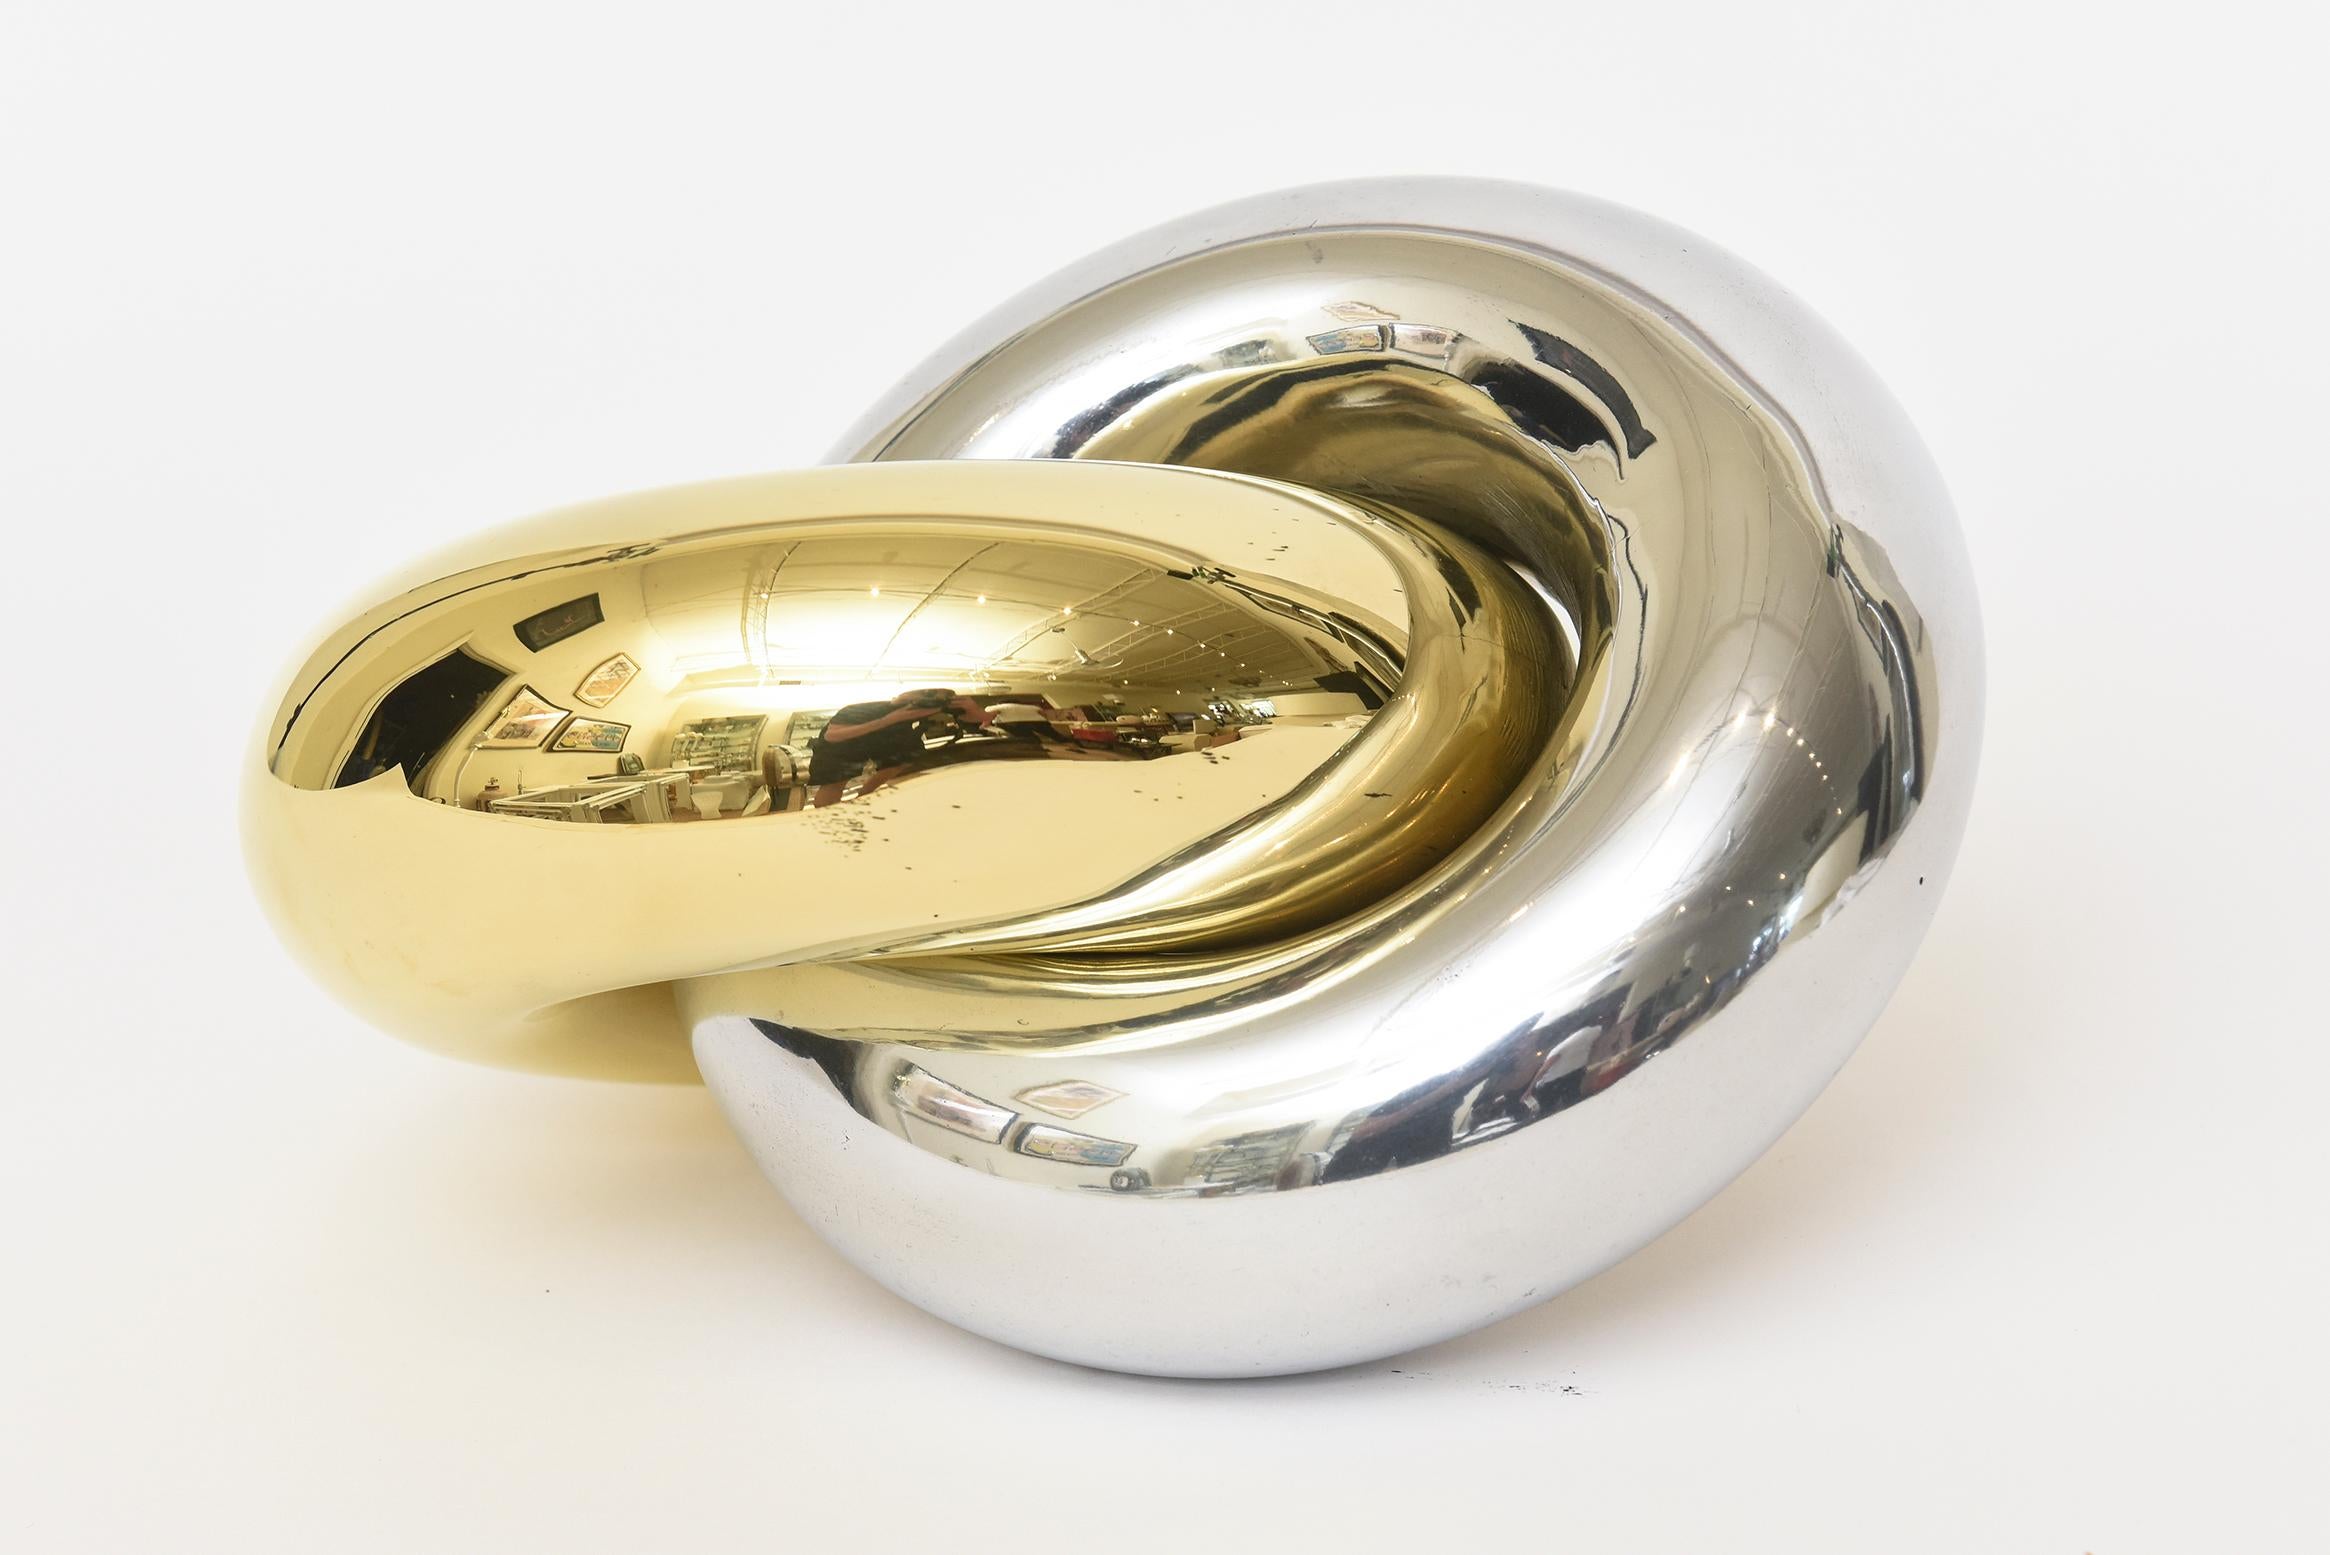 This amazing vintage 1970's intertwined ring sculpture is a duality of brass and chrome plated surfaces that cross over. It has a mirror like effect from all reflections. The two rings are twisted into each other as one great sculpture. it is silver